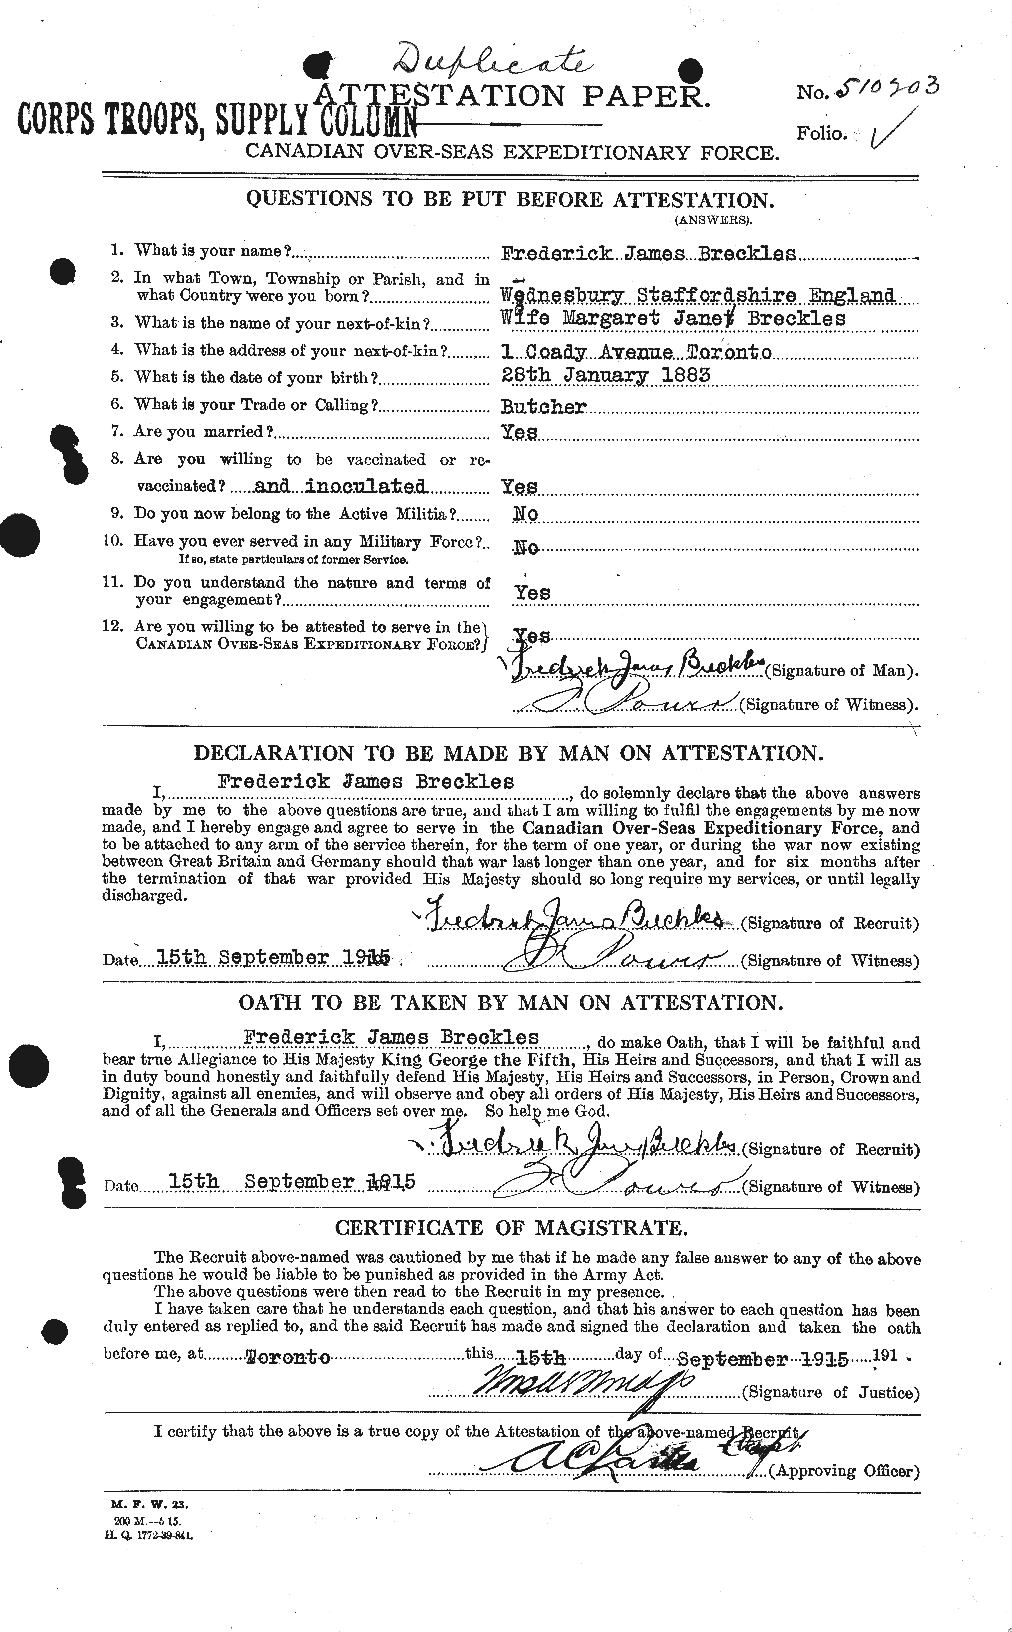 Personnel Records of the First World War - CEF 263434a